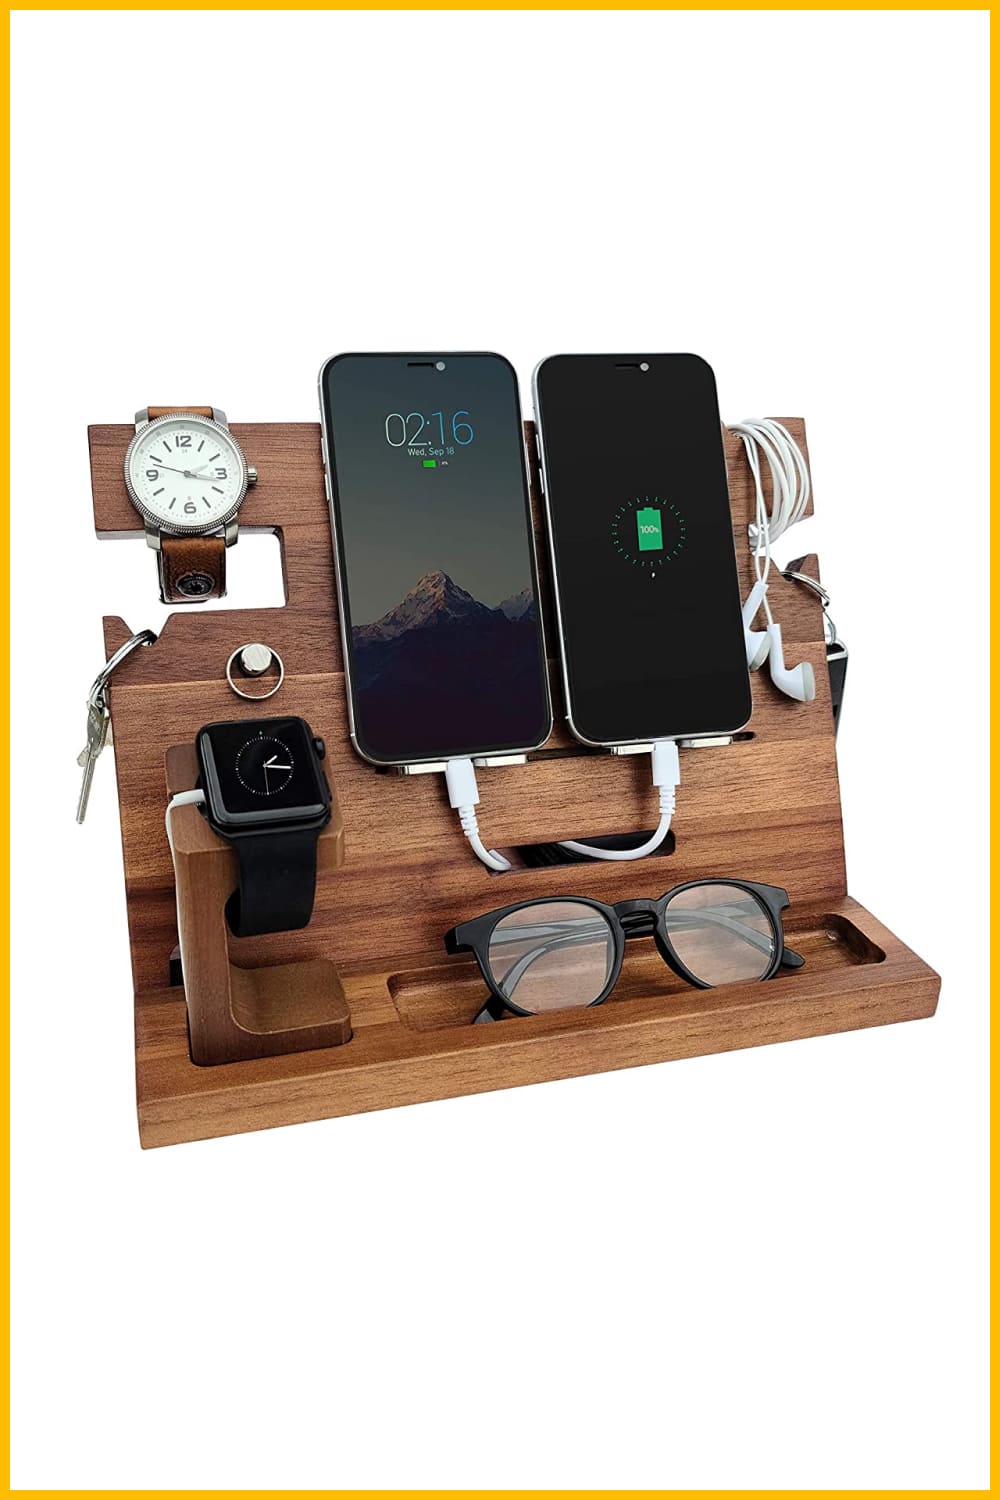 Docking station made of wood with two iPhones, a watch and glasses on it.